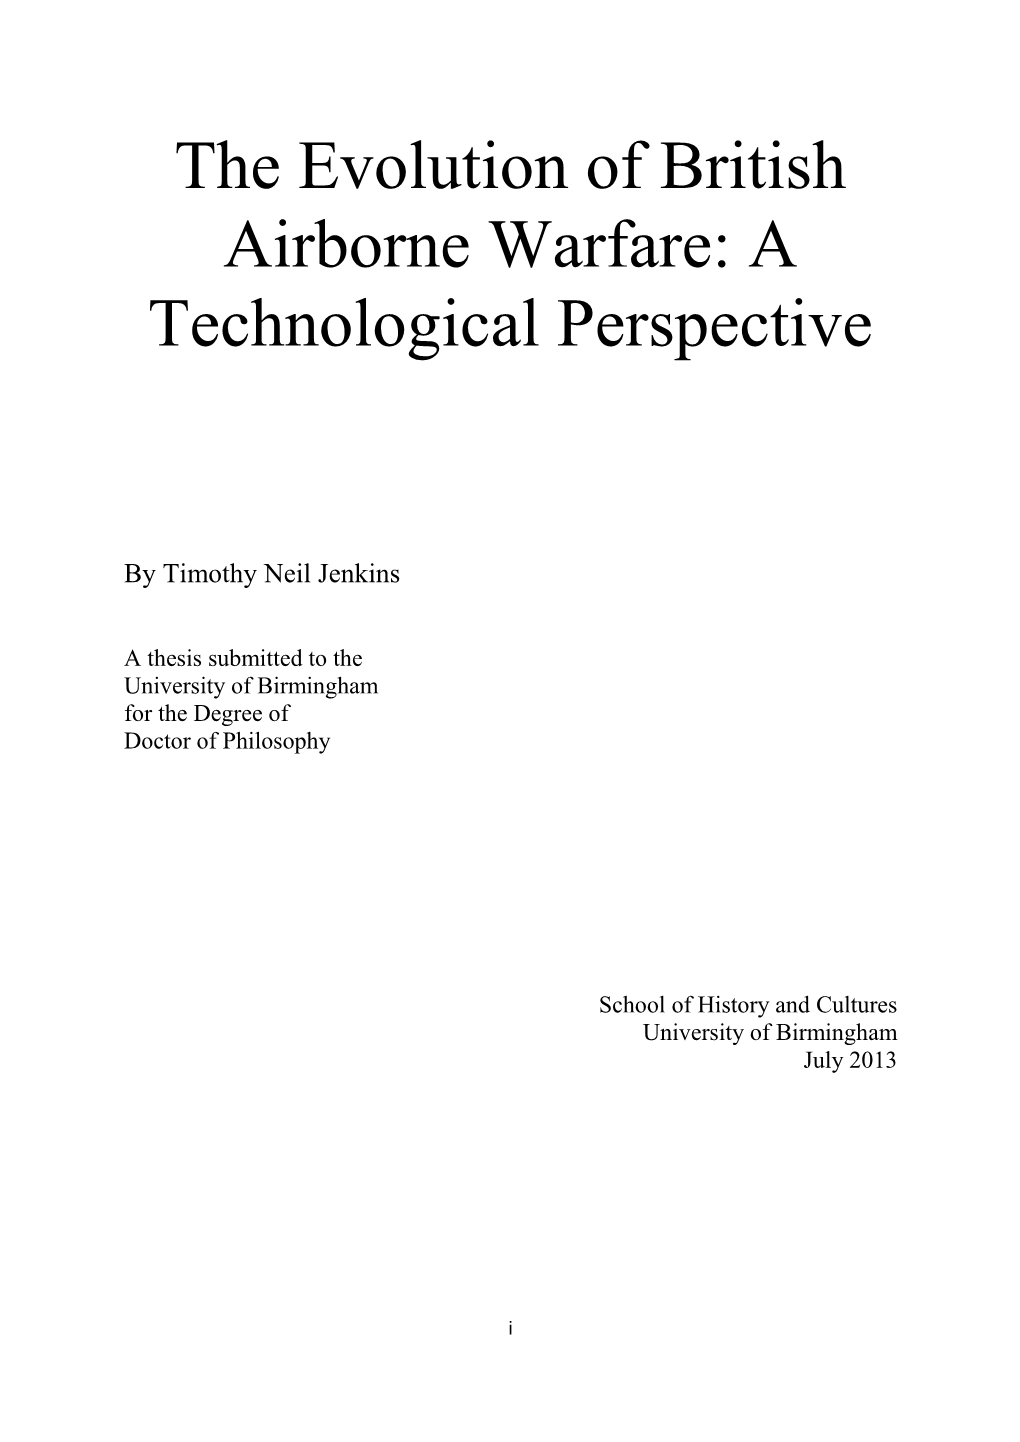 The Evolution of British Airborne Warfare: a Technological Perspective